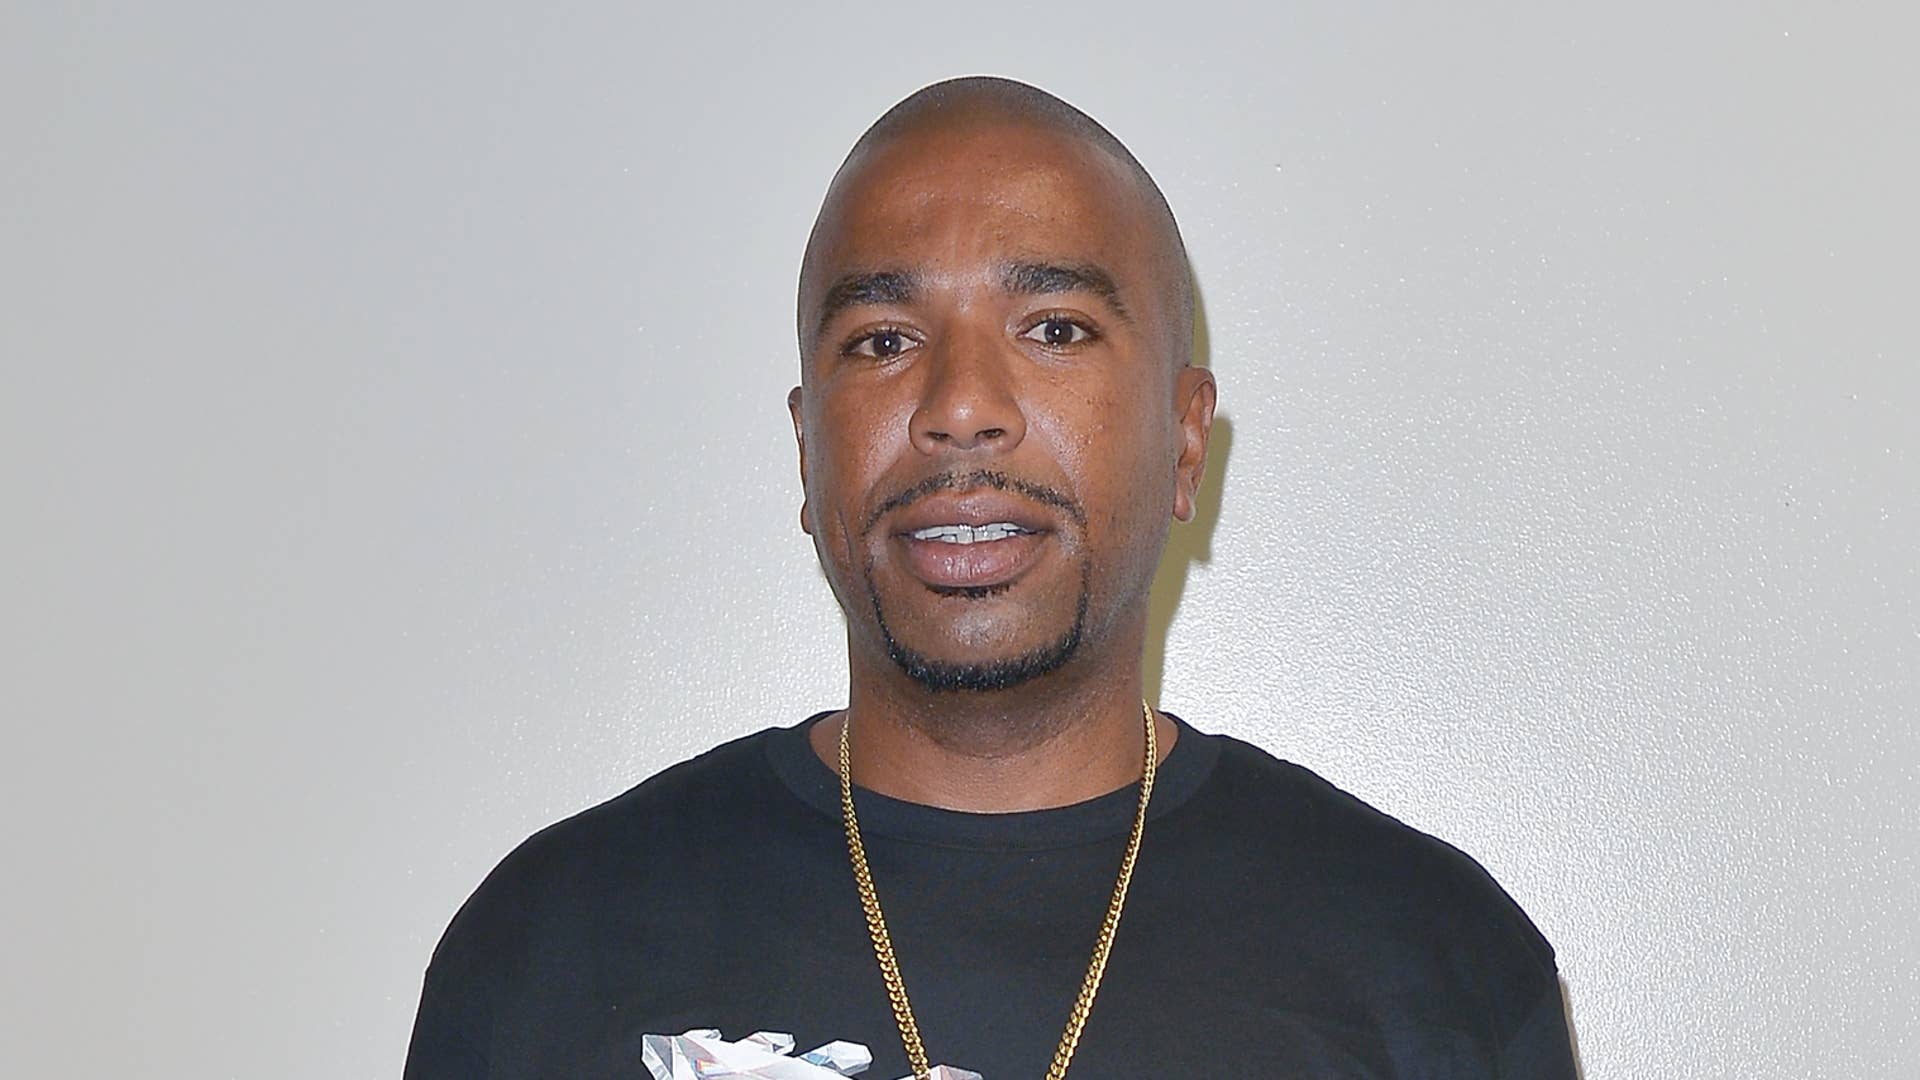 N.O.R.E. poses for photo at a book signing event.